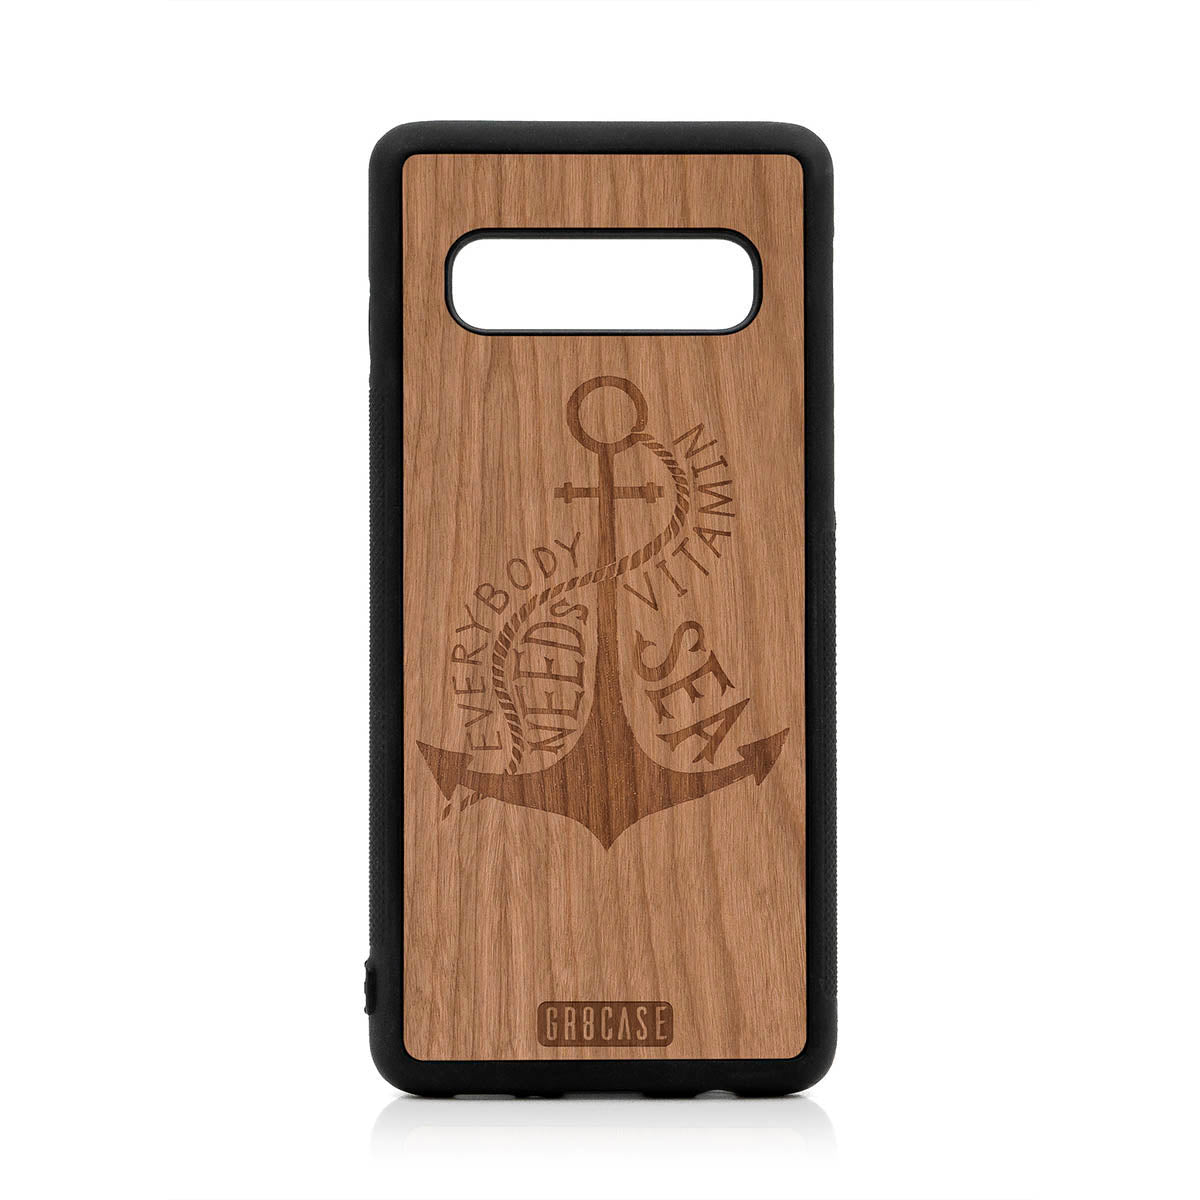 Everybody Needs Vitamin Sea (Anchor) Design Wood Case For Samsung Galaxy S10 by GR8CASE